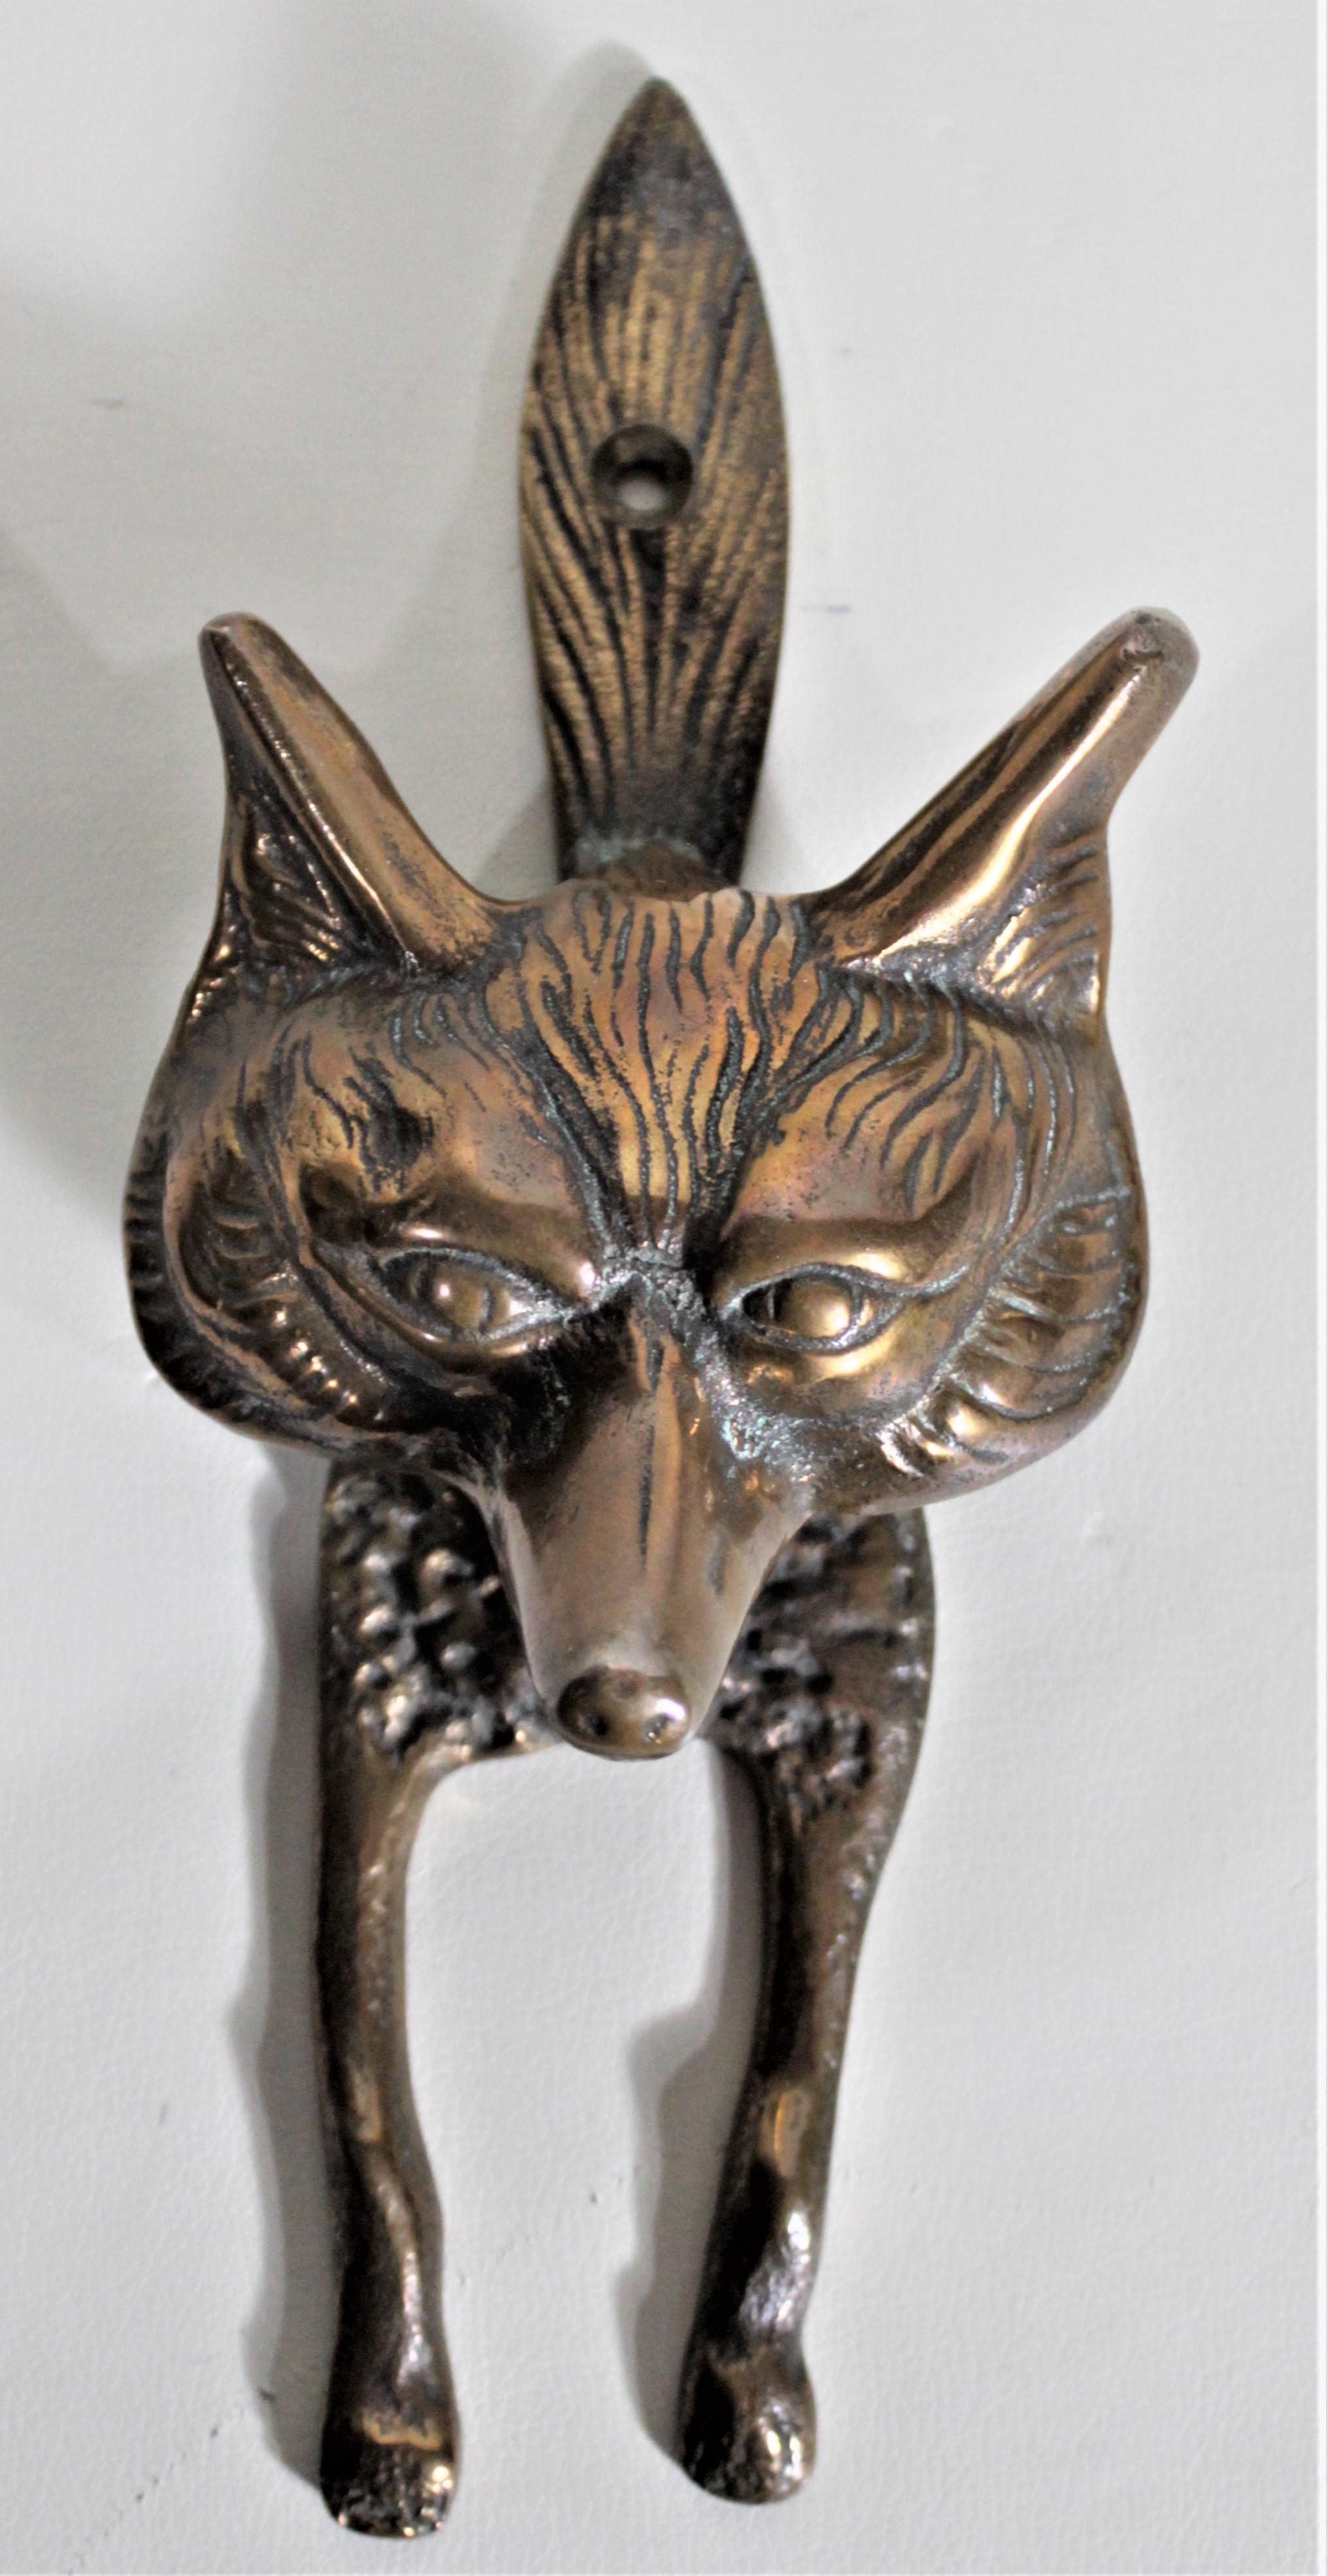 This ornately cast solid brass door knocker has no maker's marks, but presumed to have been made in likely Austria in circa 1920. This door knocker is fashioned as a stylized fox with the tail, torso and legs making up the base plate, and the head